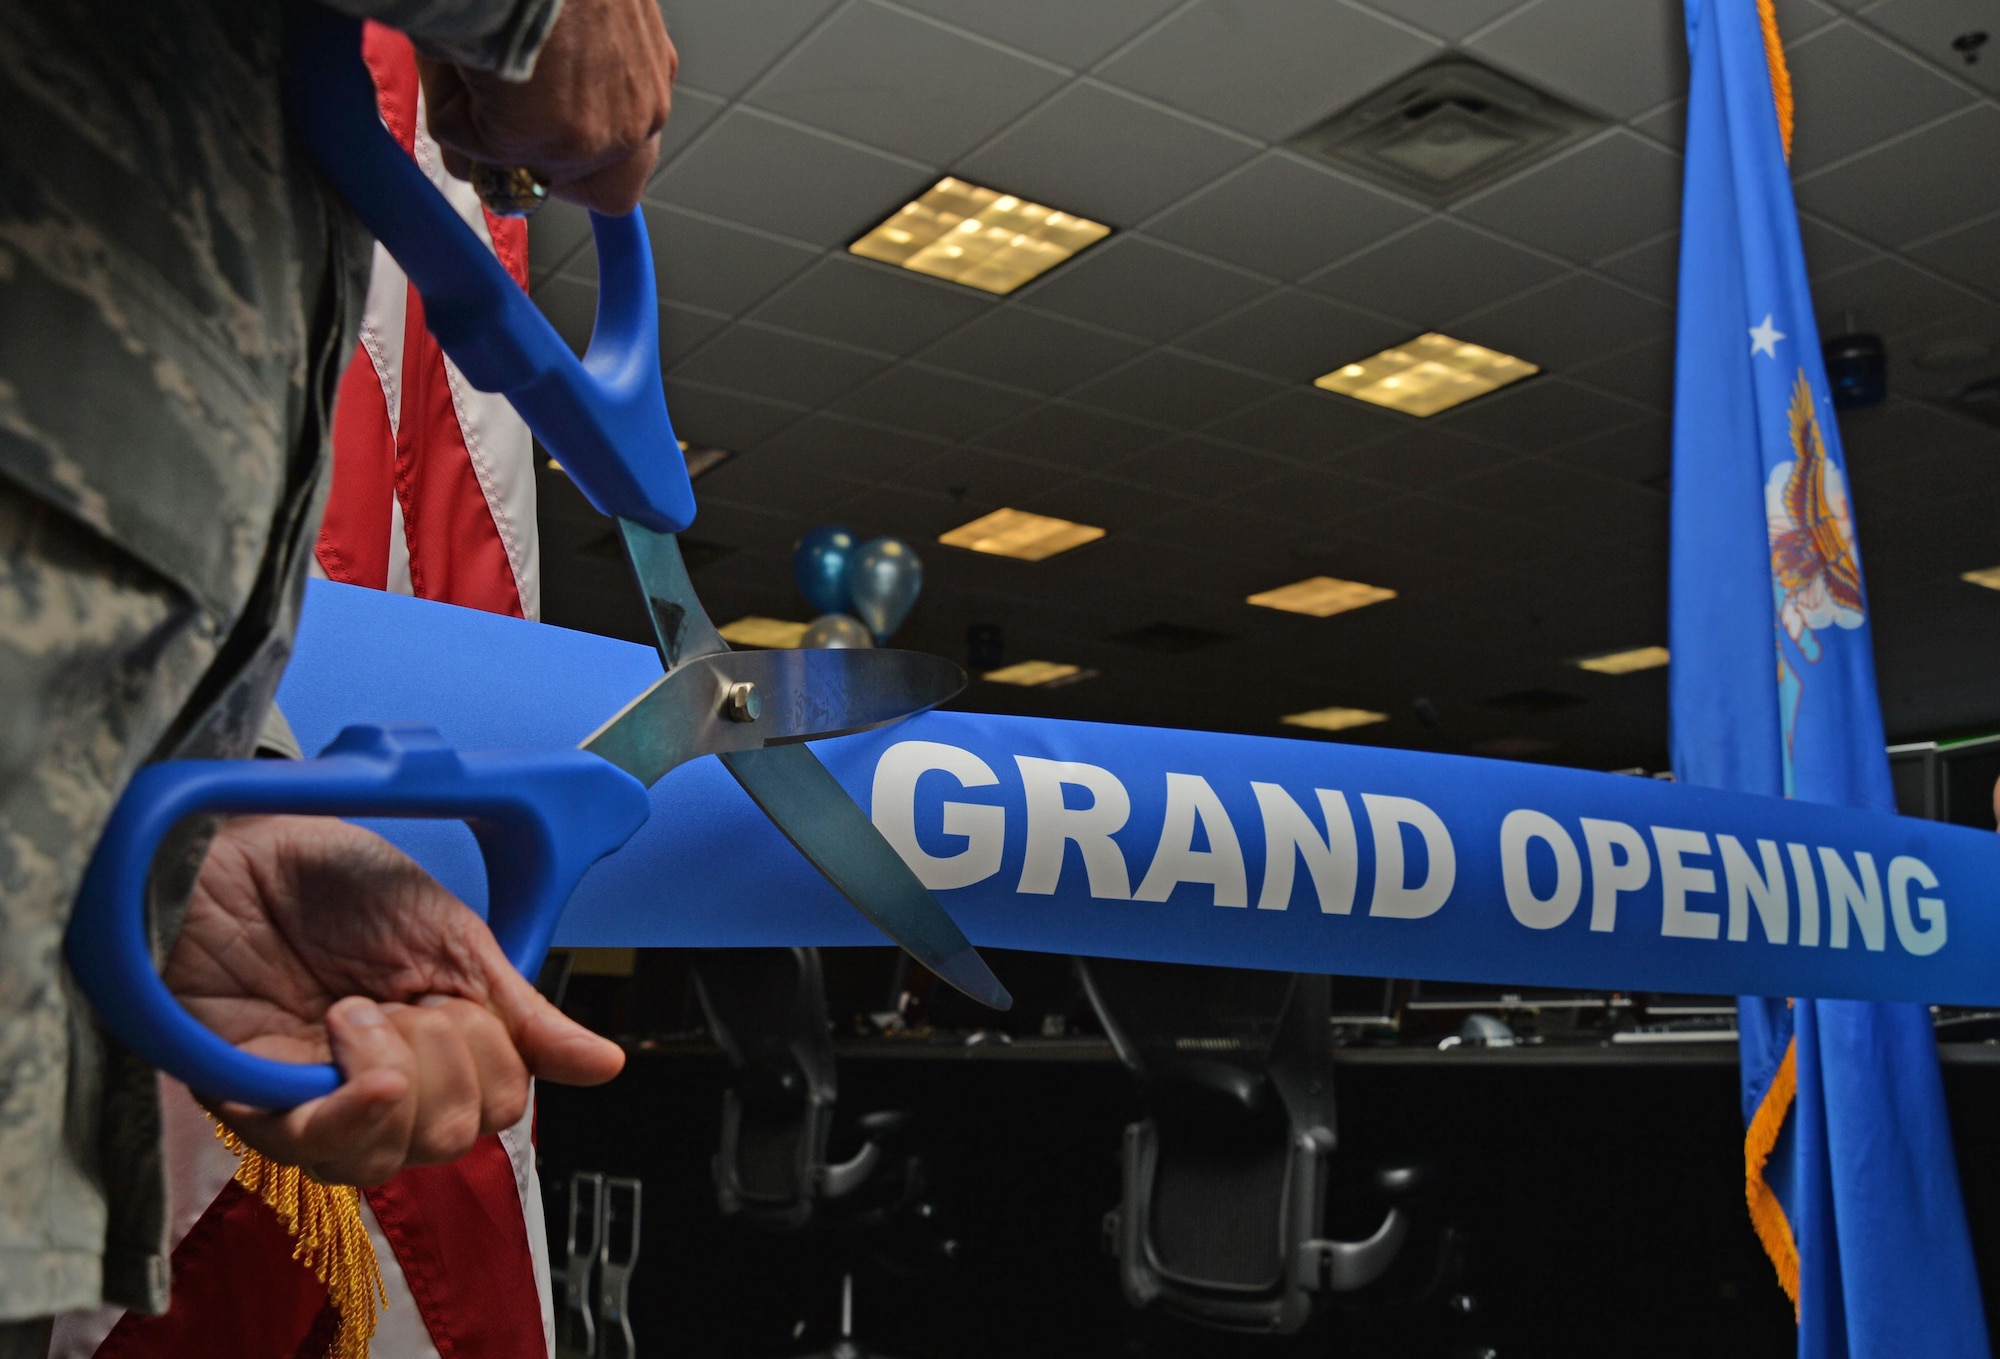 Col. David Austin, commander of the 505th Training Group, prepares to cut a ribbon to symbolize the re-opening of the Air Component Control Facility during a ceremony at Hurlburt Field, Fla., June 27, 2016. The 505th Combat Training Squadron building has been under renovations for seven months to update their facilities in order to increase mission readiness for the squadron’s live virtual and constructive training. (U.S. Air Force photo by Senior Airman Andrea Posey)